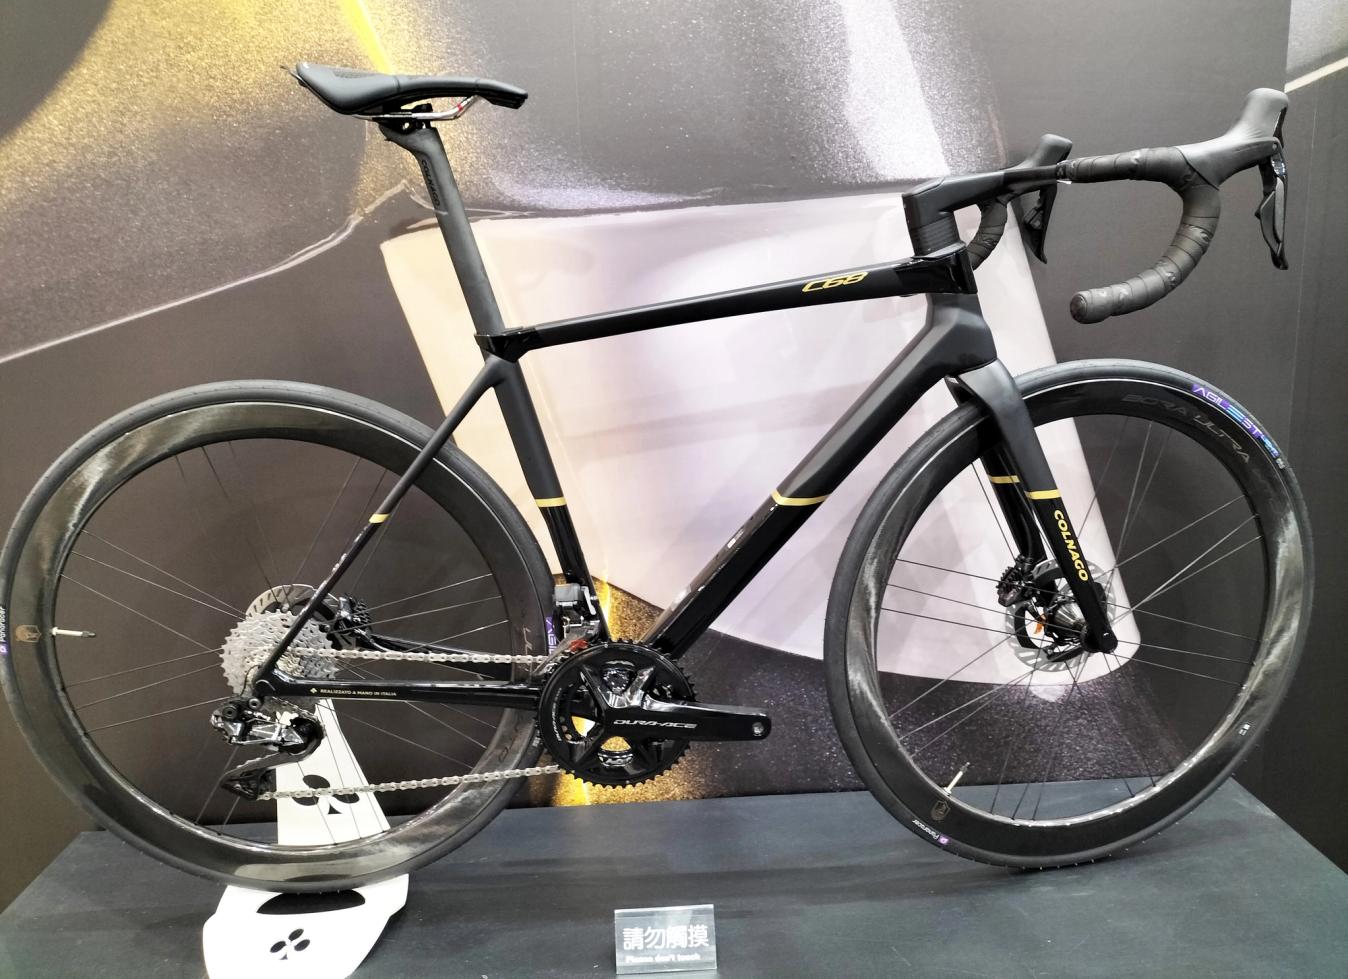 Colnago's C68 isn't raced at WorldTour level, that's taken care of by the brand's V4Rs. It's still a seriously high-performing, lightweight bike and this special-edition colourway is a real eye-catcher